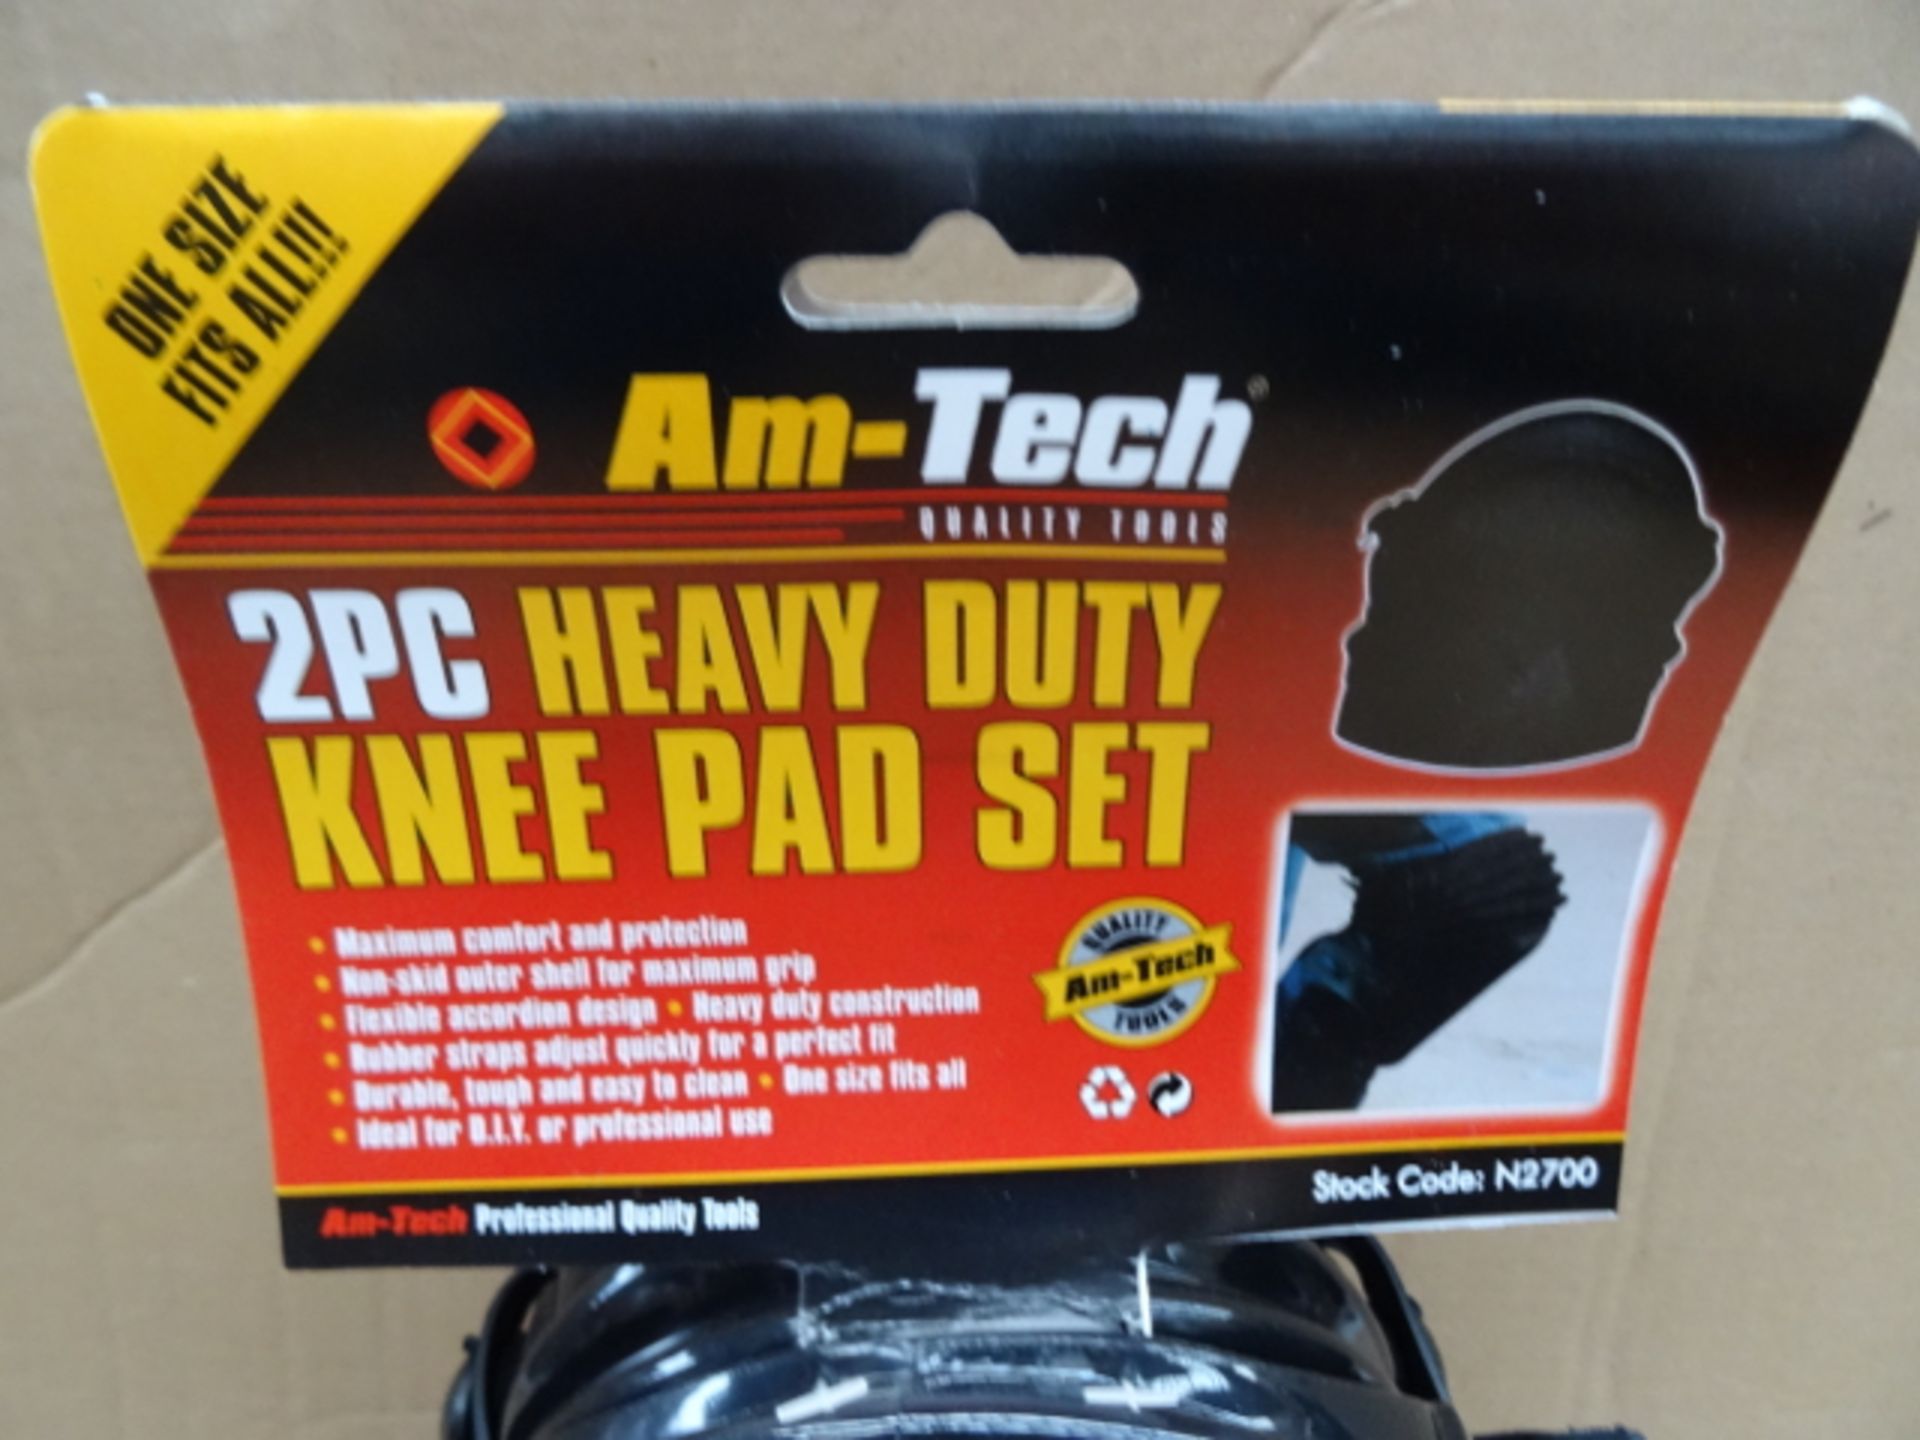 20 x Am-Tech Quality Tools. 2 Piece Heavy Duty Knee Pad Set. One Size fits all. Very high quality! - Image 3 of 4